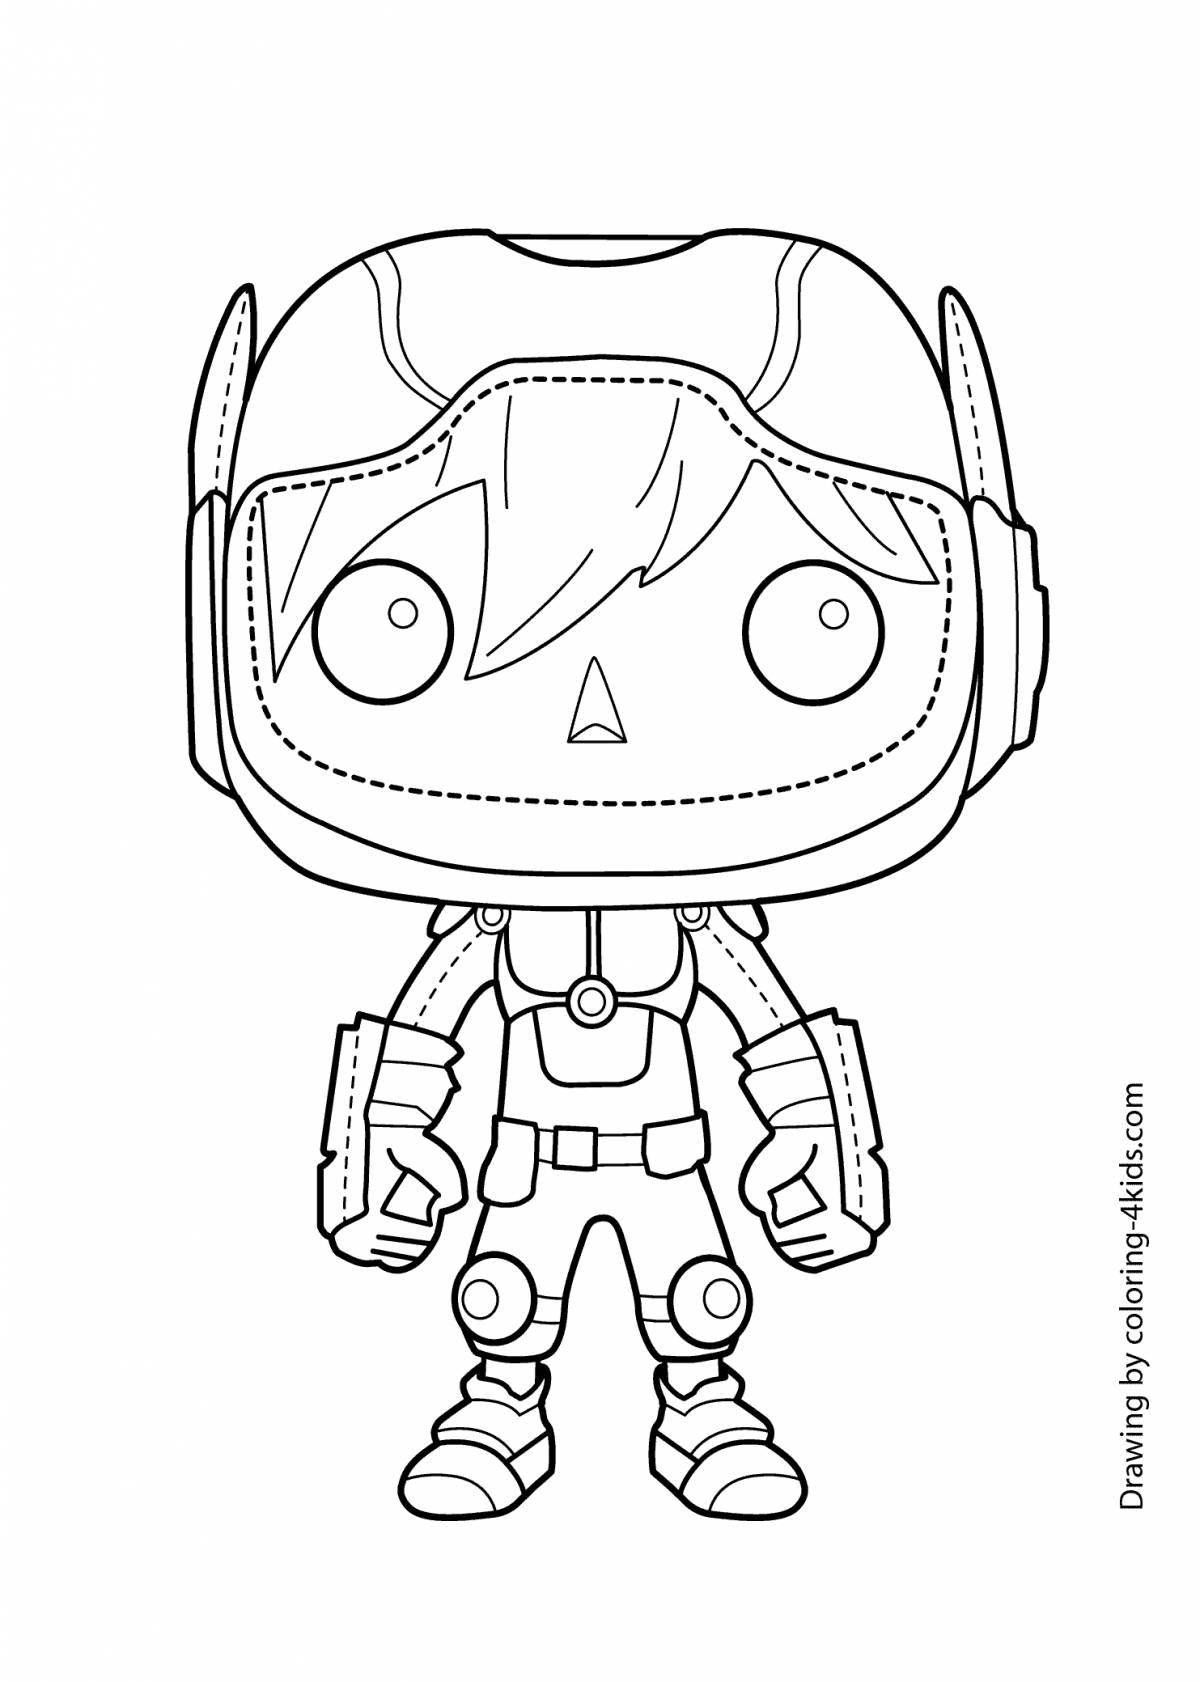 Adorable New Hero 2 Coloring Page